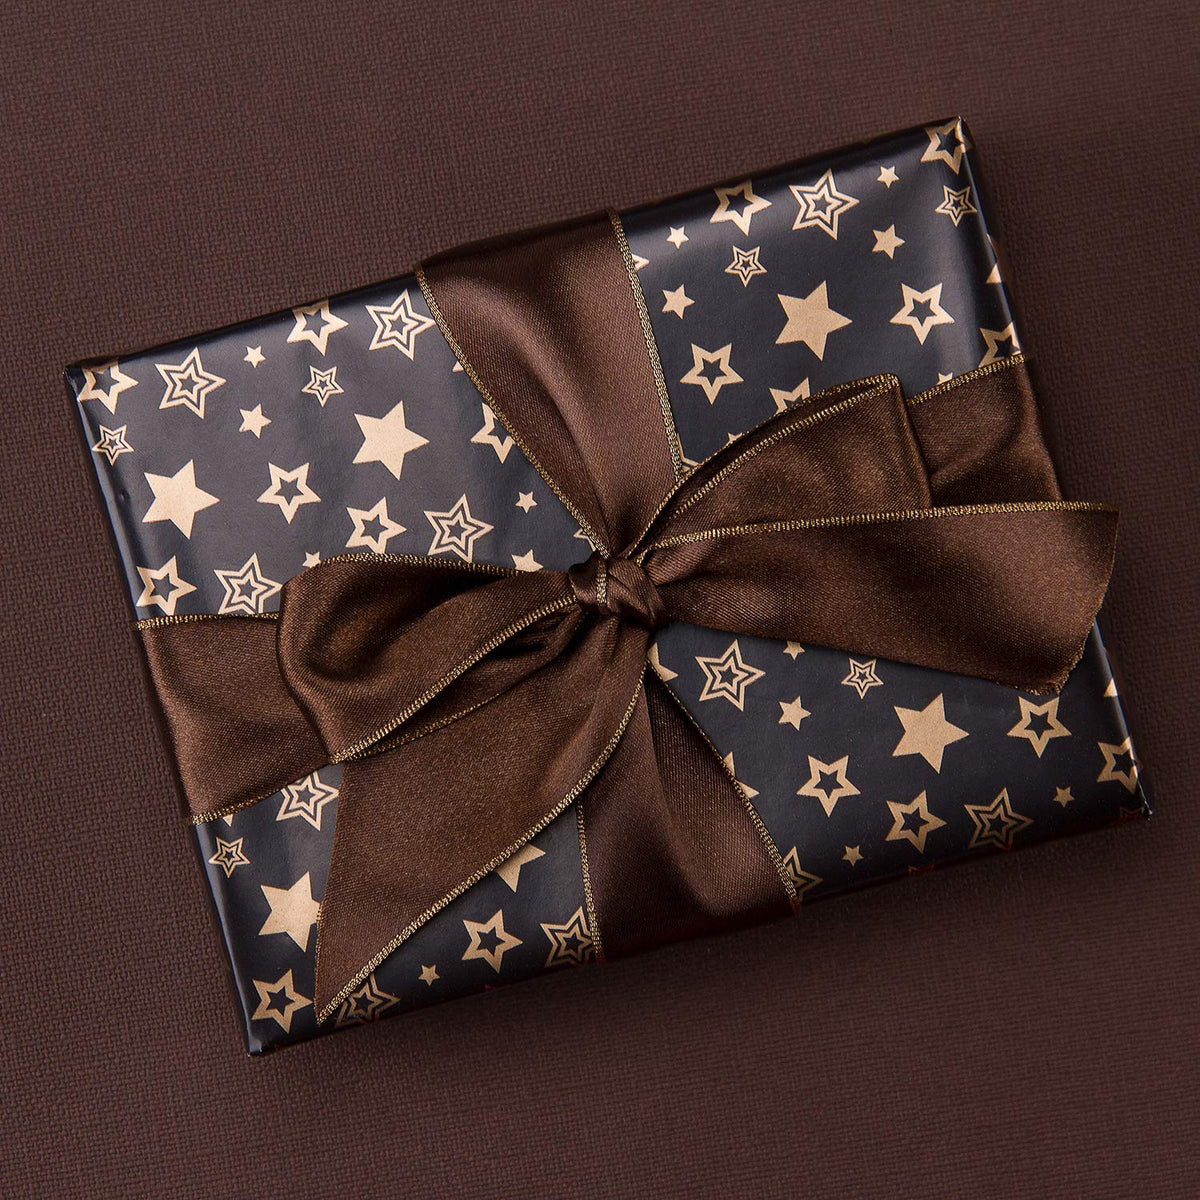 Black + Gold Dots, Joy, Stars Holiday Wrapping Paper Rolls, 3 Rolls -  Papyrus